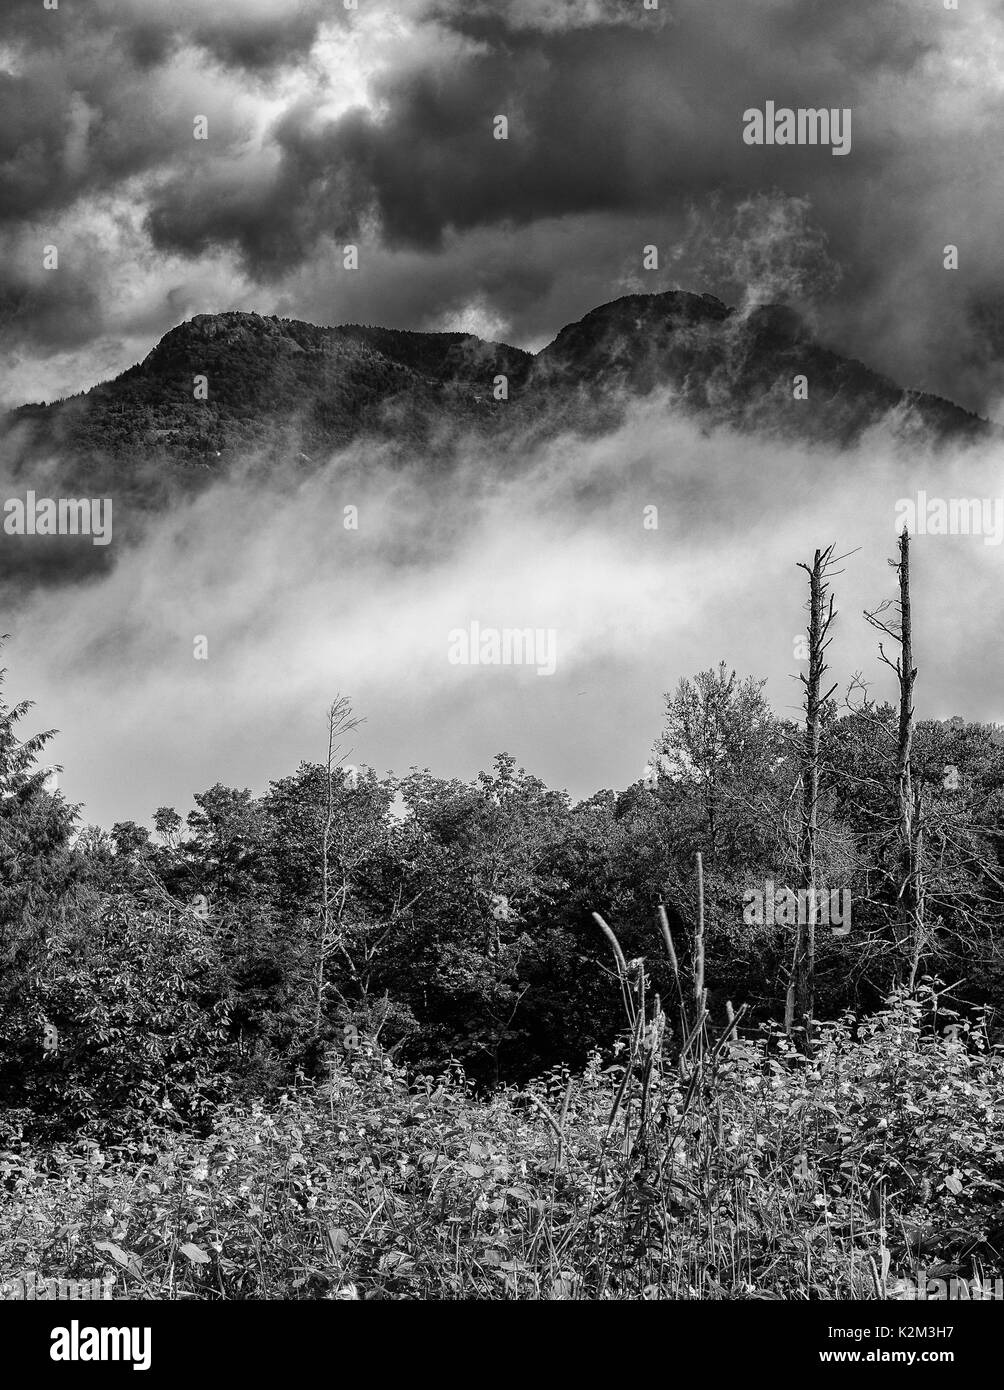 Grandfather Mountain In Fog Linville, North Carolina - Moody Grandfather Mountain Pokes Through The Fog, Blue Ridge Parkway Stormy Clouds Stock Photo